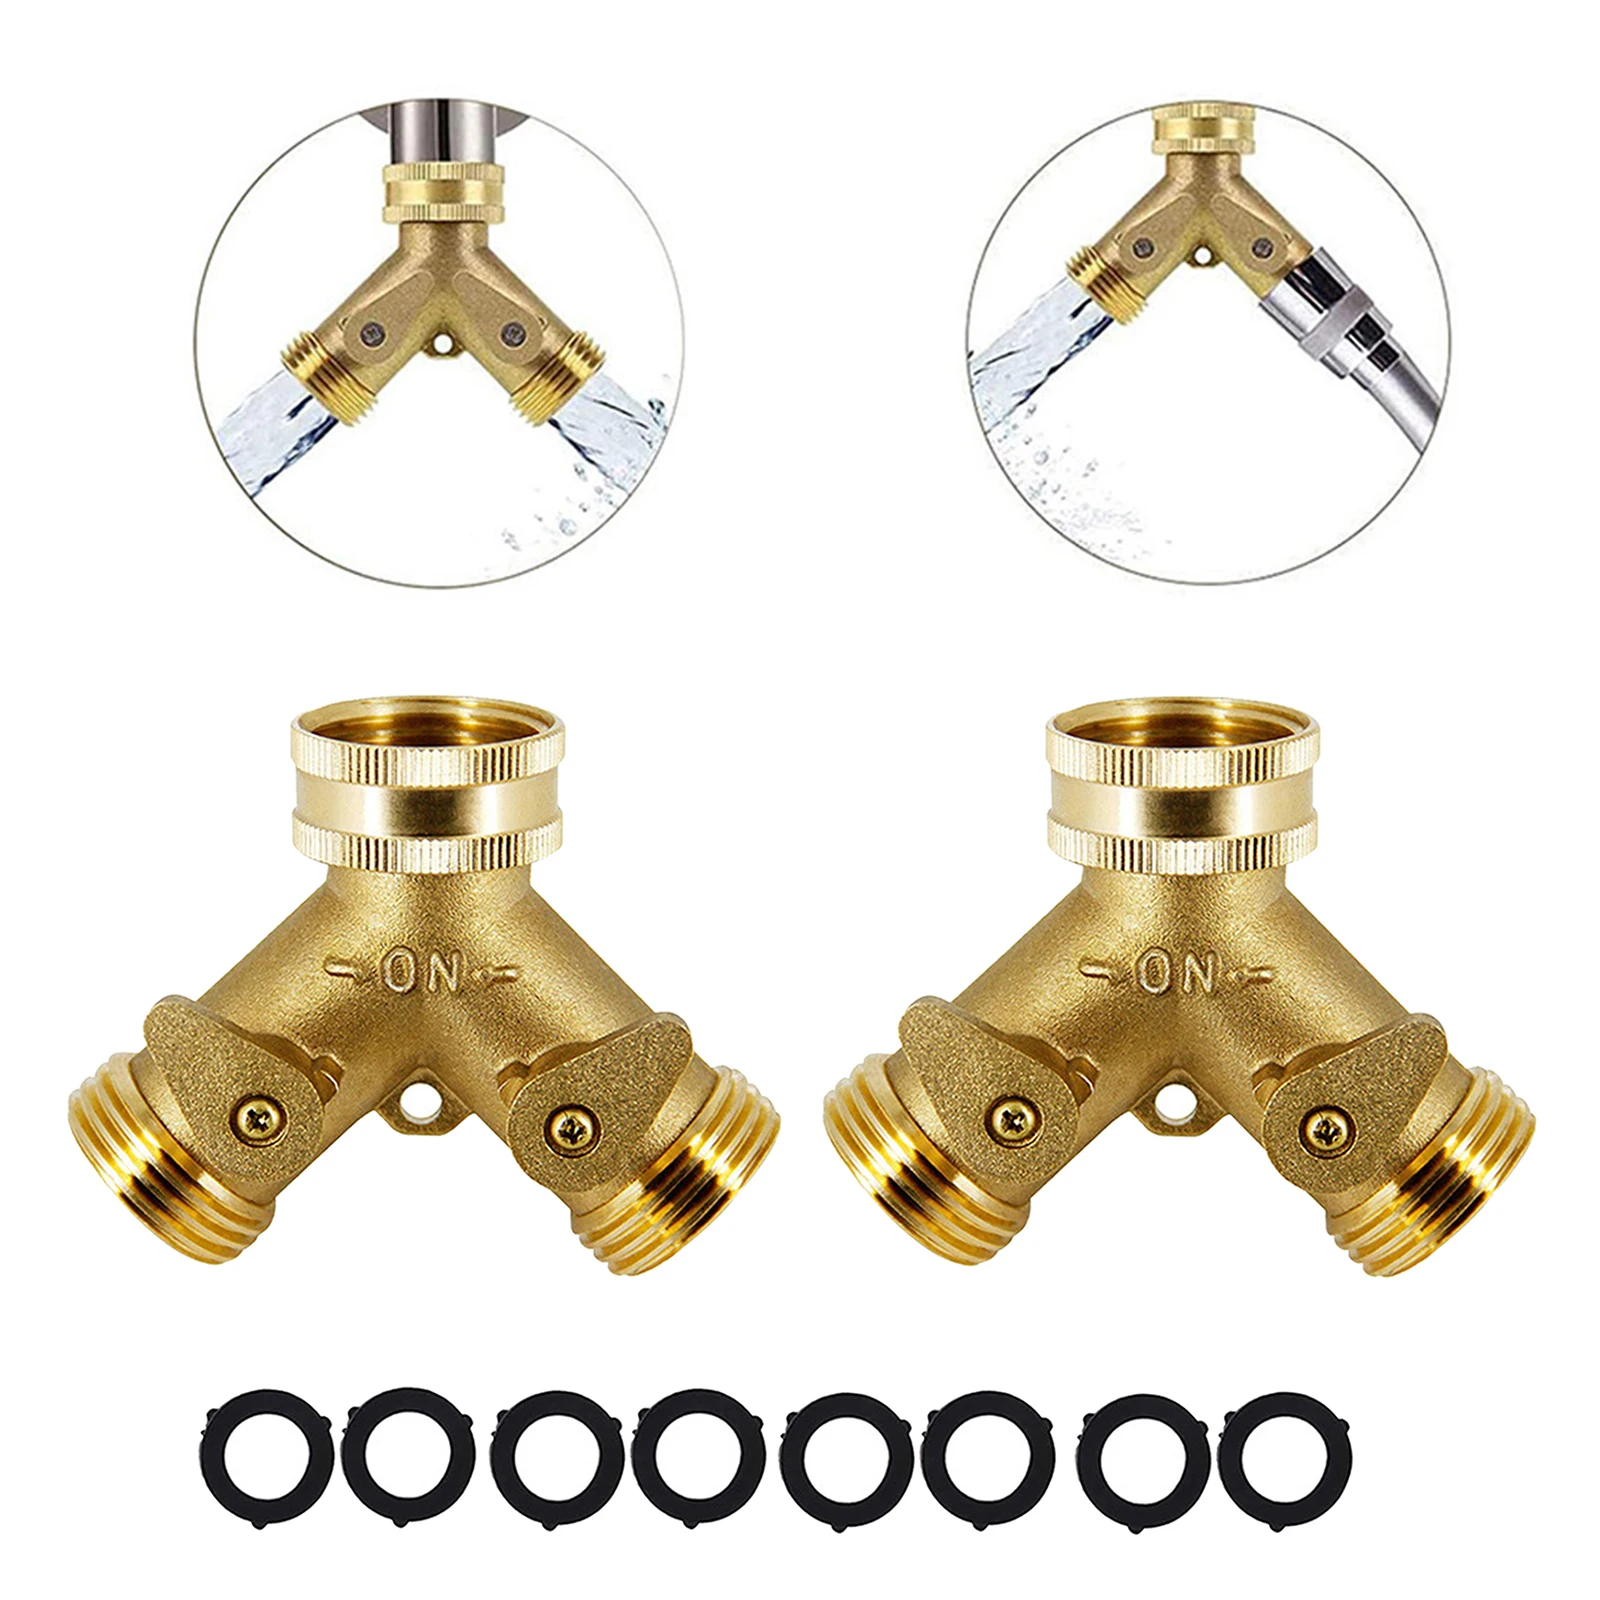 Heavy Duty Brass Connector Tap Splitter Y Connector Brass Garden Hose Adapter with 2 Valves 2Pcs Garden Hose Splitter 2 Way 2PCS 